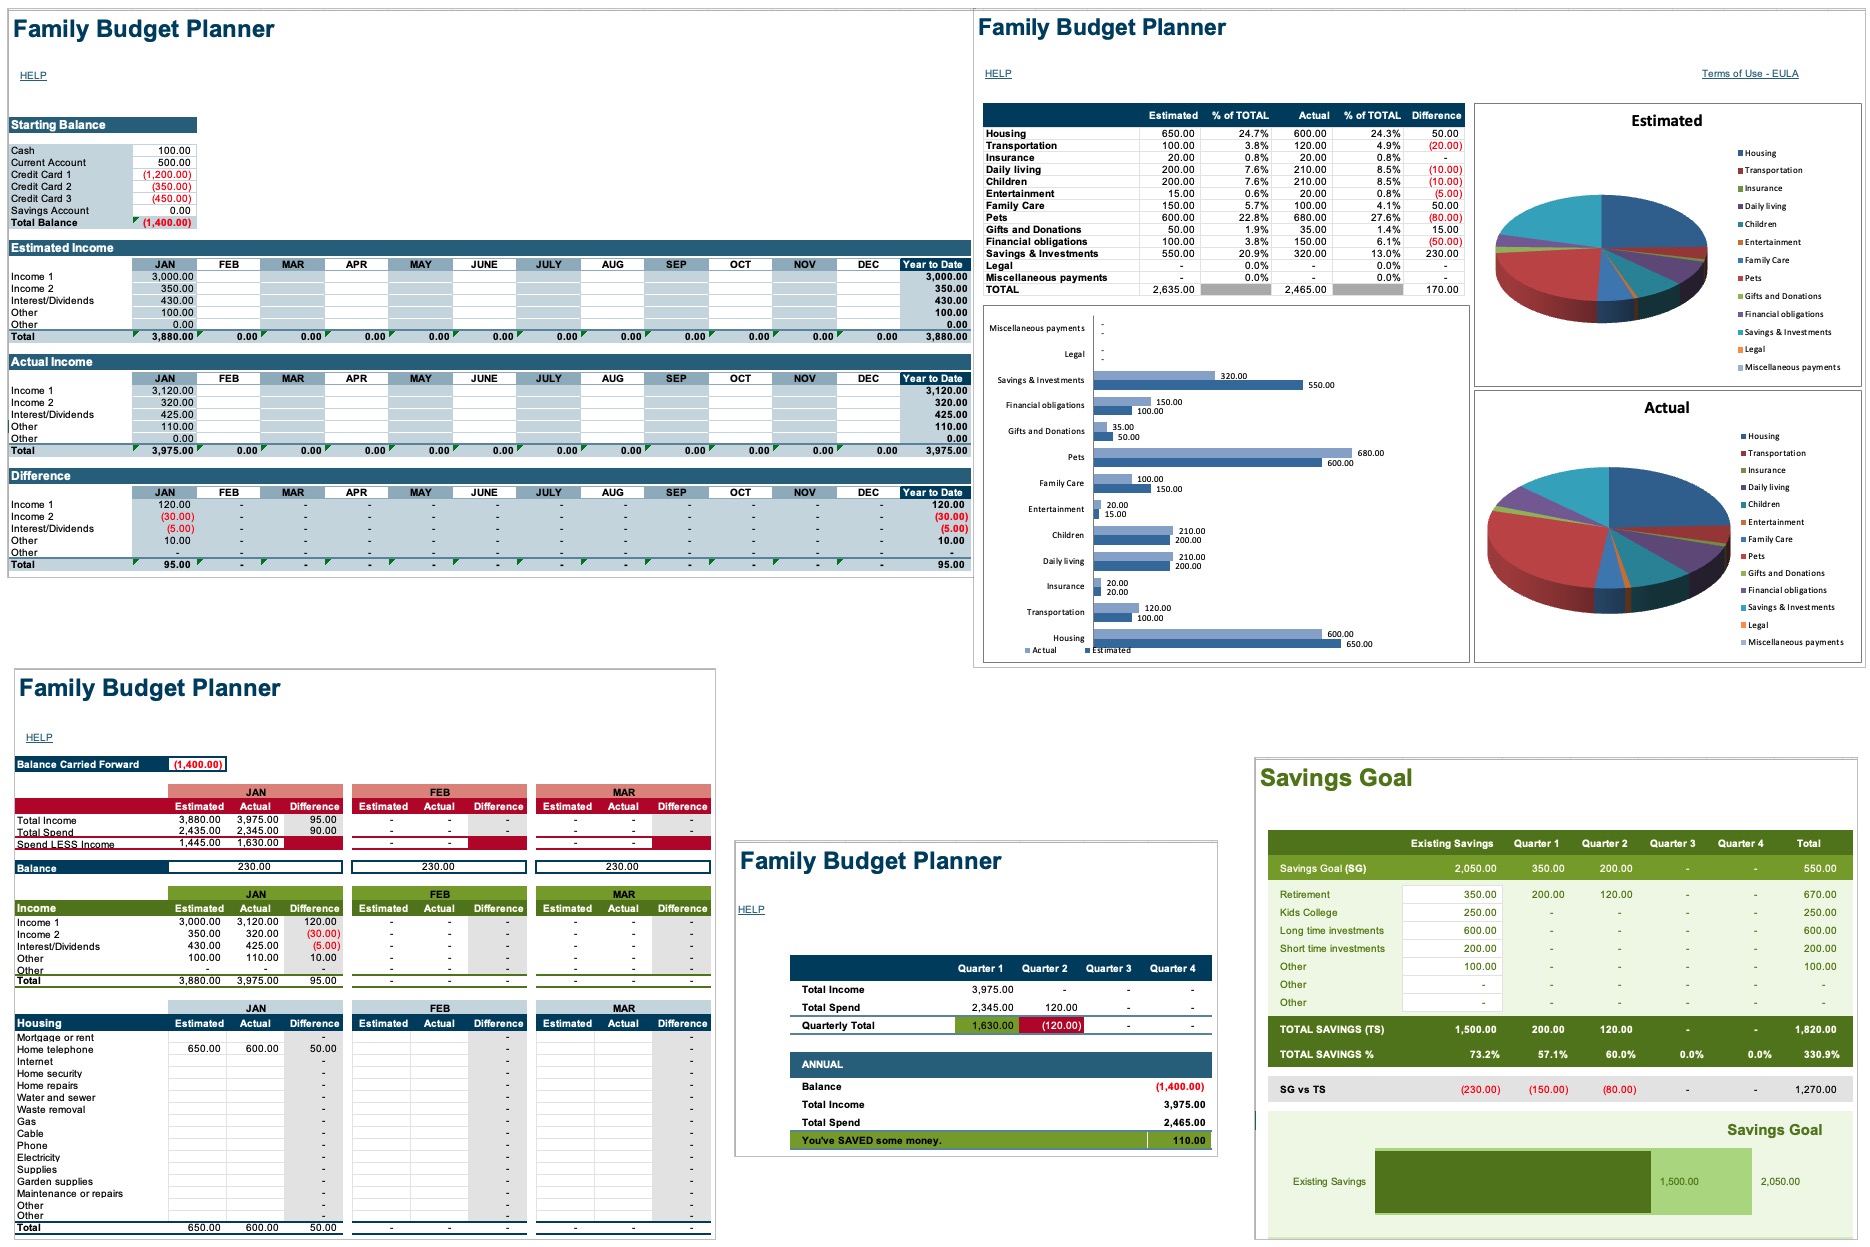 financial planning excel templates